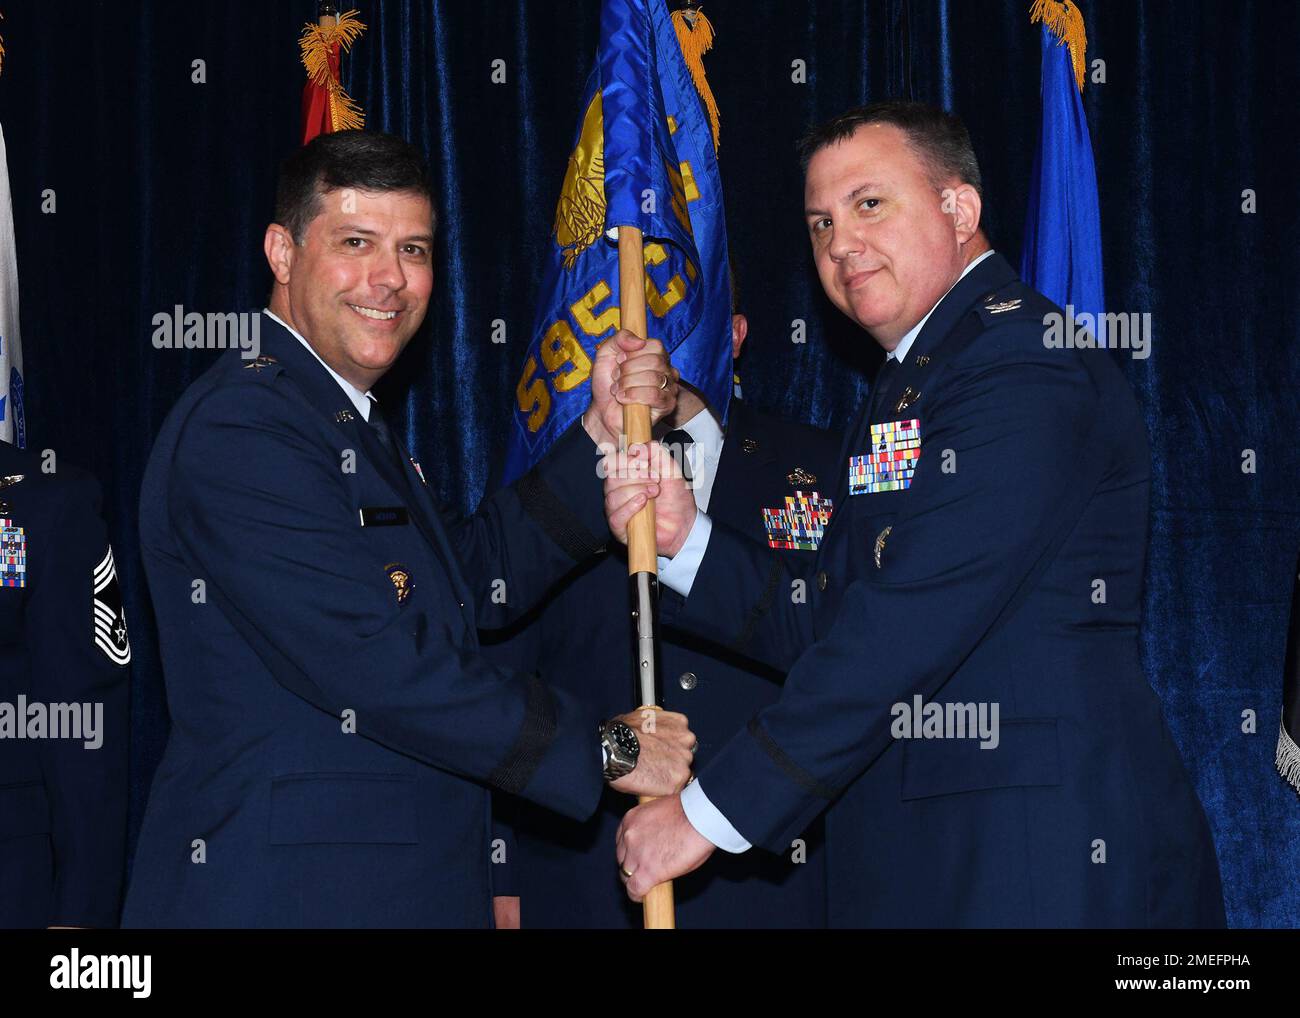 Col. David Leaumont accepts the 595th Command and Control Group guidon from Maj. Gen. Andrew J. Gebara, Eighth Air Force and Joint-Global Strike Operations Center commander, signifying him as the new commander of the unit during a ceremony at Offutt Air Force Base, Nebraska, Aug. 16, 2022. The new commander arrives to the 595th C2G and the National Airborne Operations Center from the Pentagon, where he served as the assistant deputy director for nuclear and homeland defense operations. Stock Photo